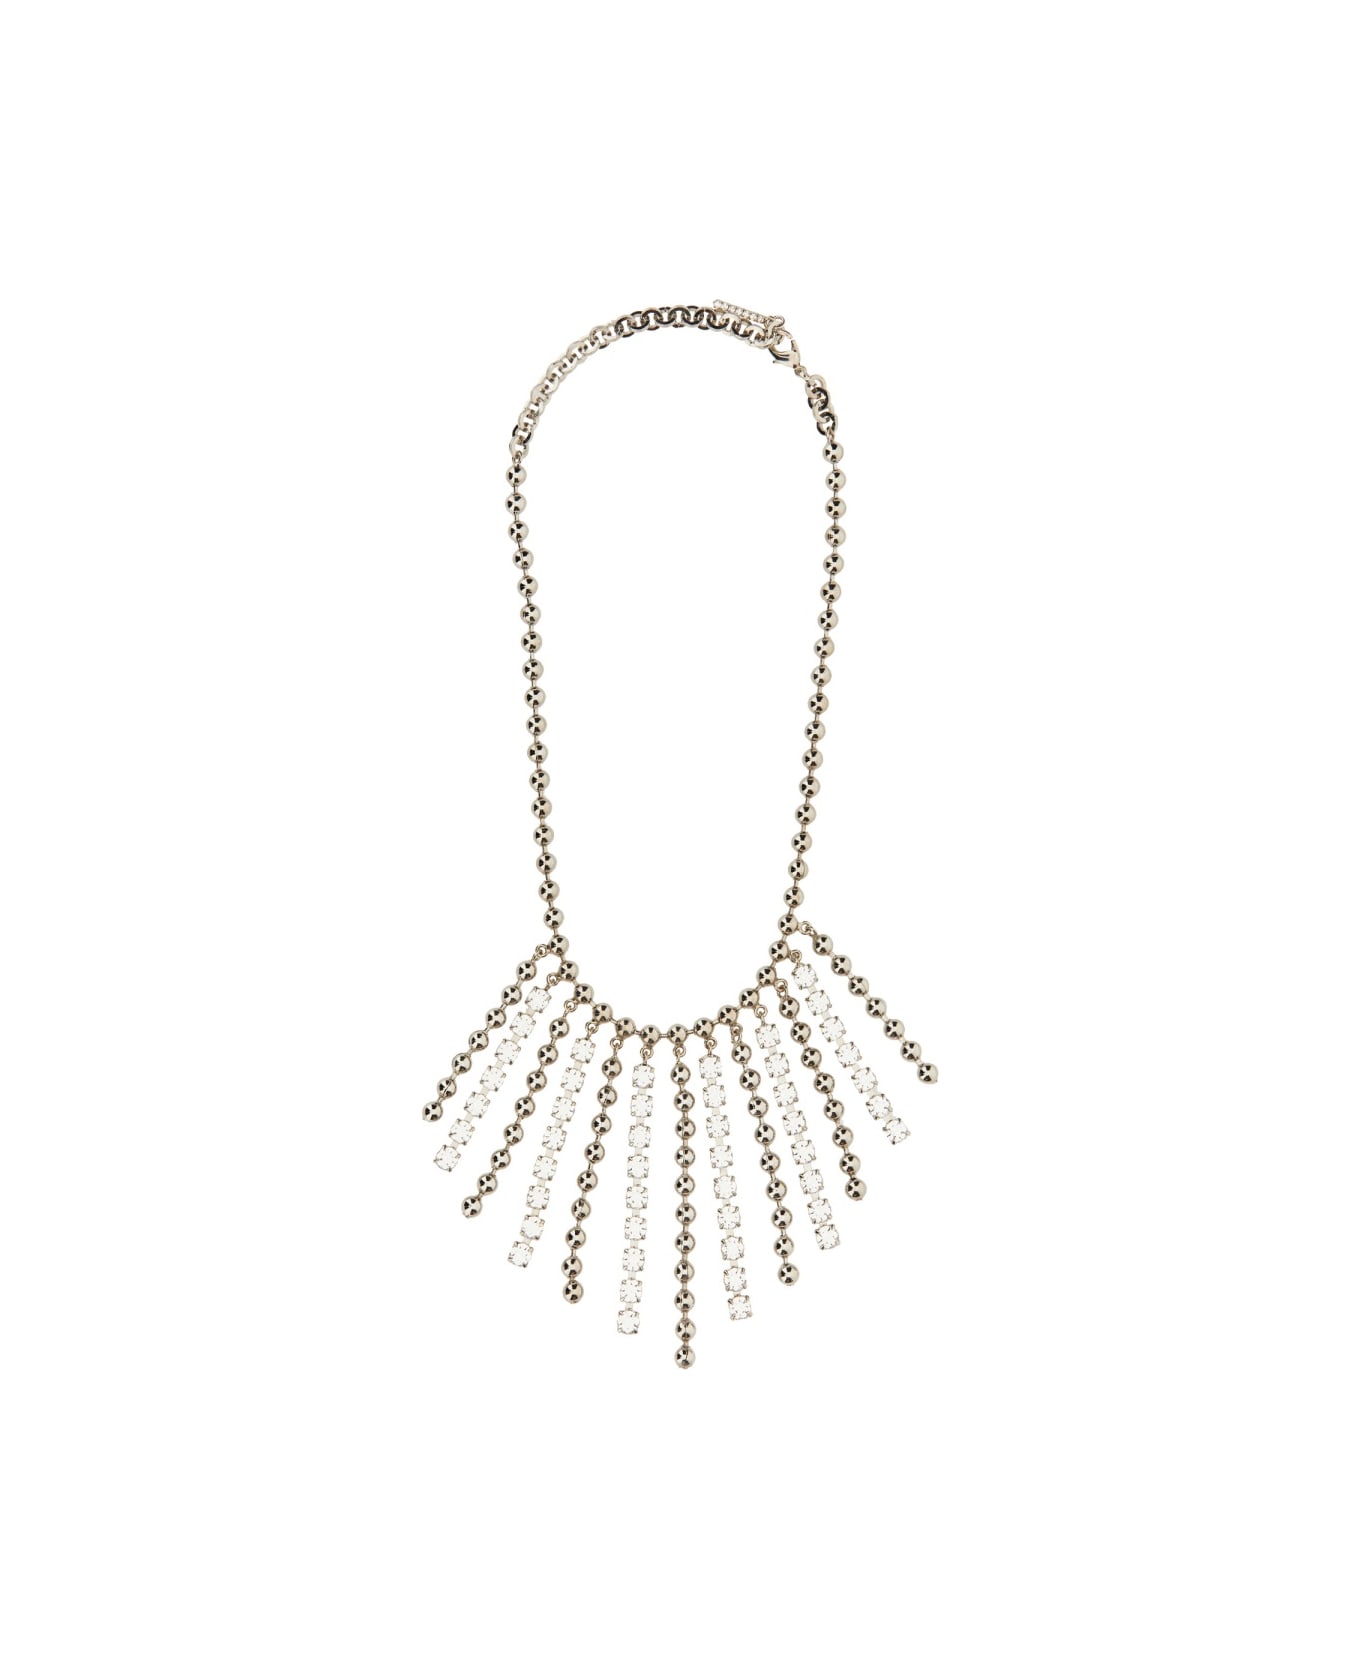 Alessandra Rich Crystal And Chain Necklace With Bangs - SILVER